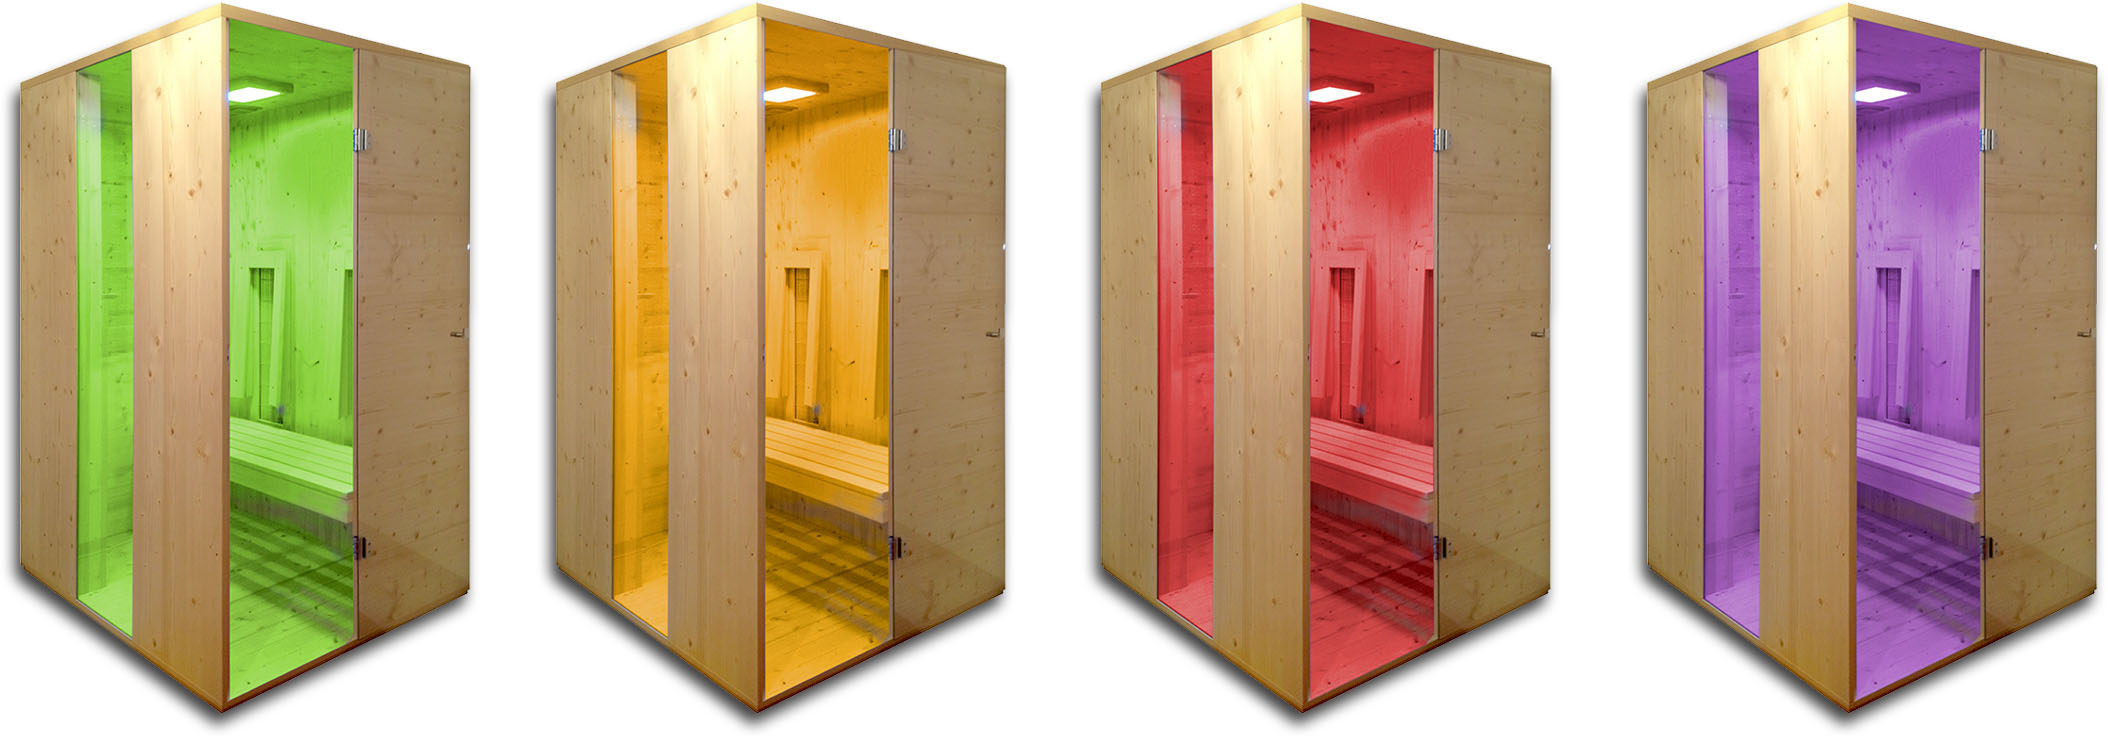 Infrared cabins with different lighting